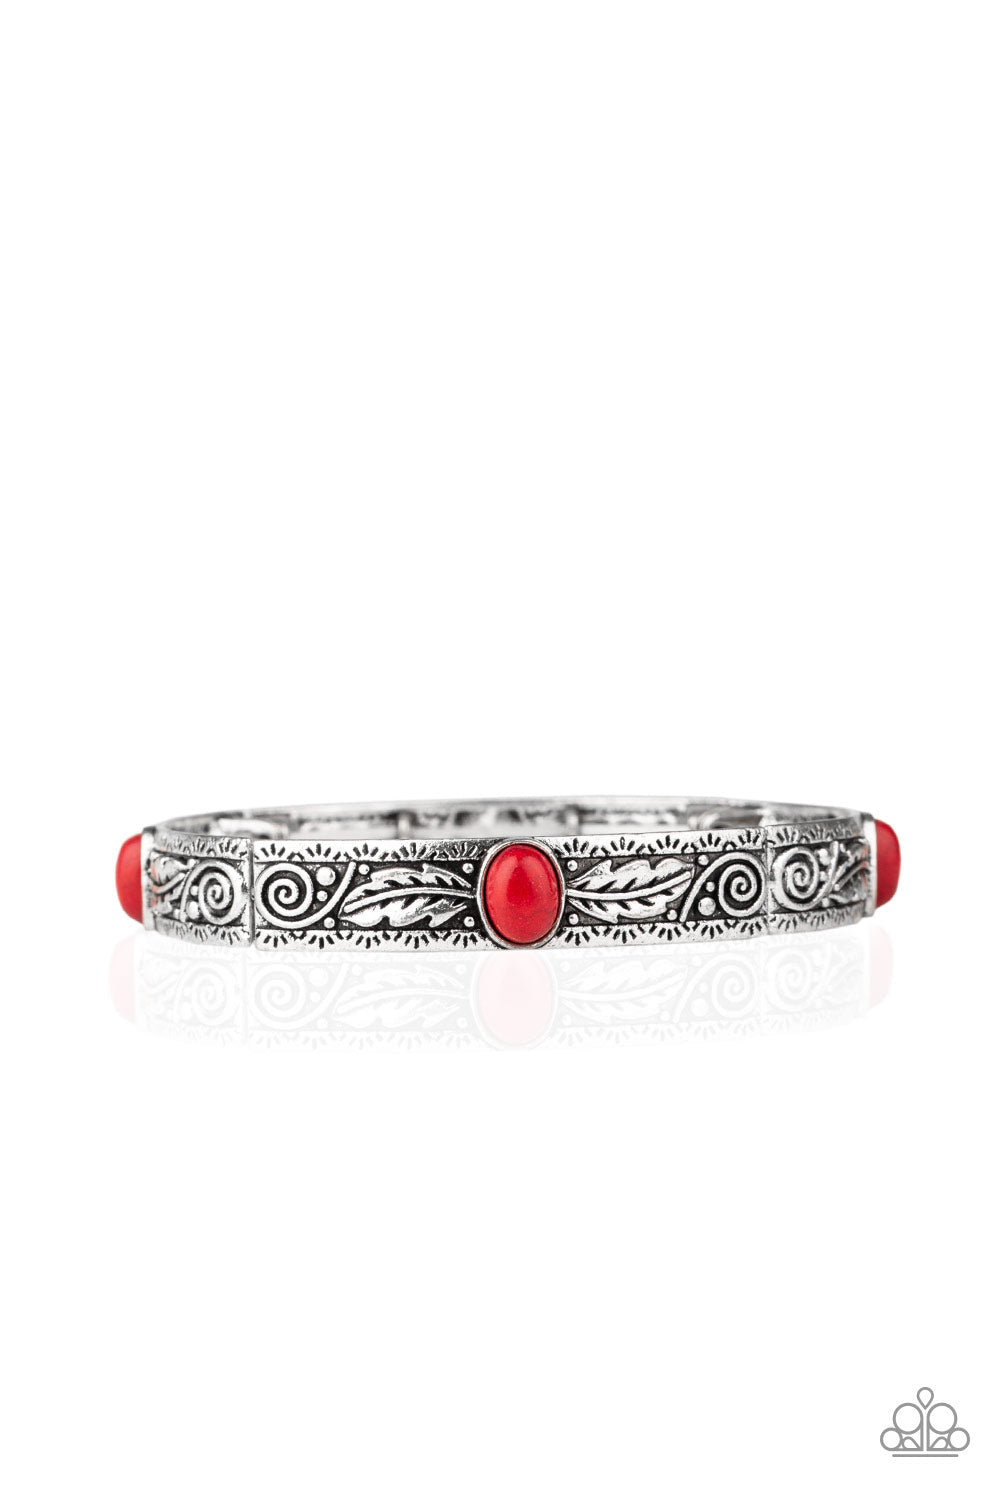 Wild West Story - Red and Silver Stretch Bracelet - Paparazzi Accessories - Embossed in swirling silver and feather like detail, antiqued silver frames are threaded along stretchy bands around the wrist. Fiery red stones adorn the centers of the Southwestern frames for a seasonal finish. Sold as one individual bracelet.